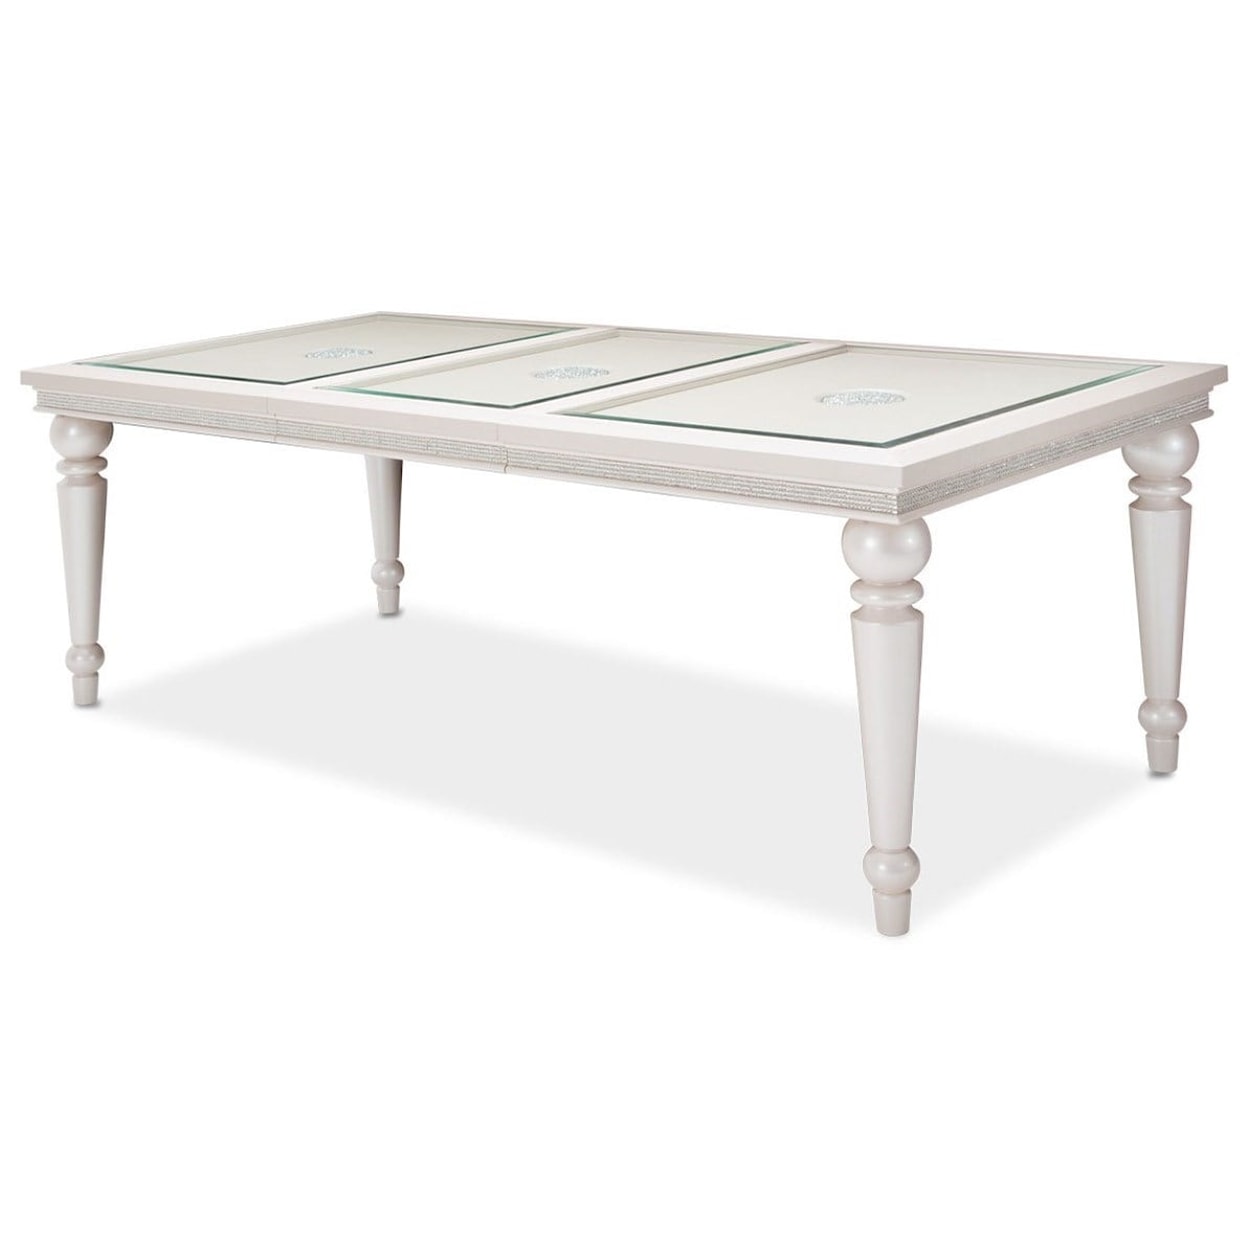 Michael Amini Glimmering Heights Rectangular Dining Table